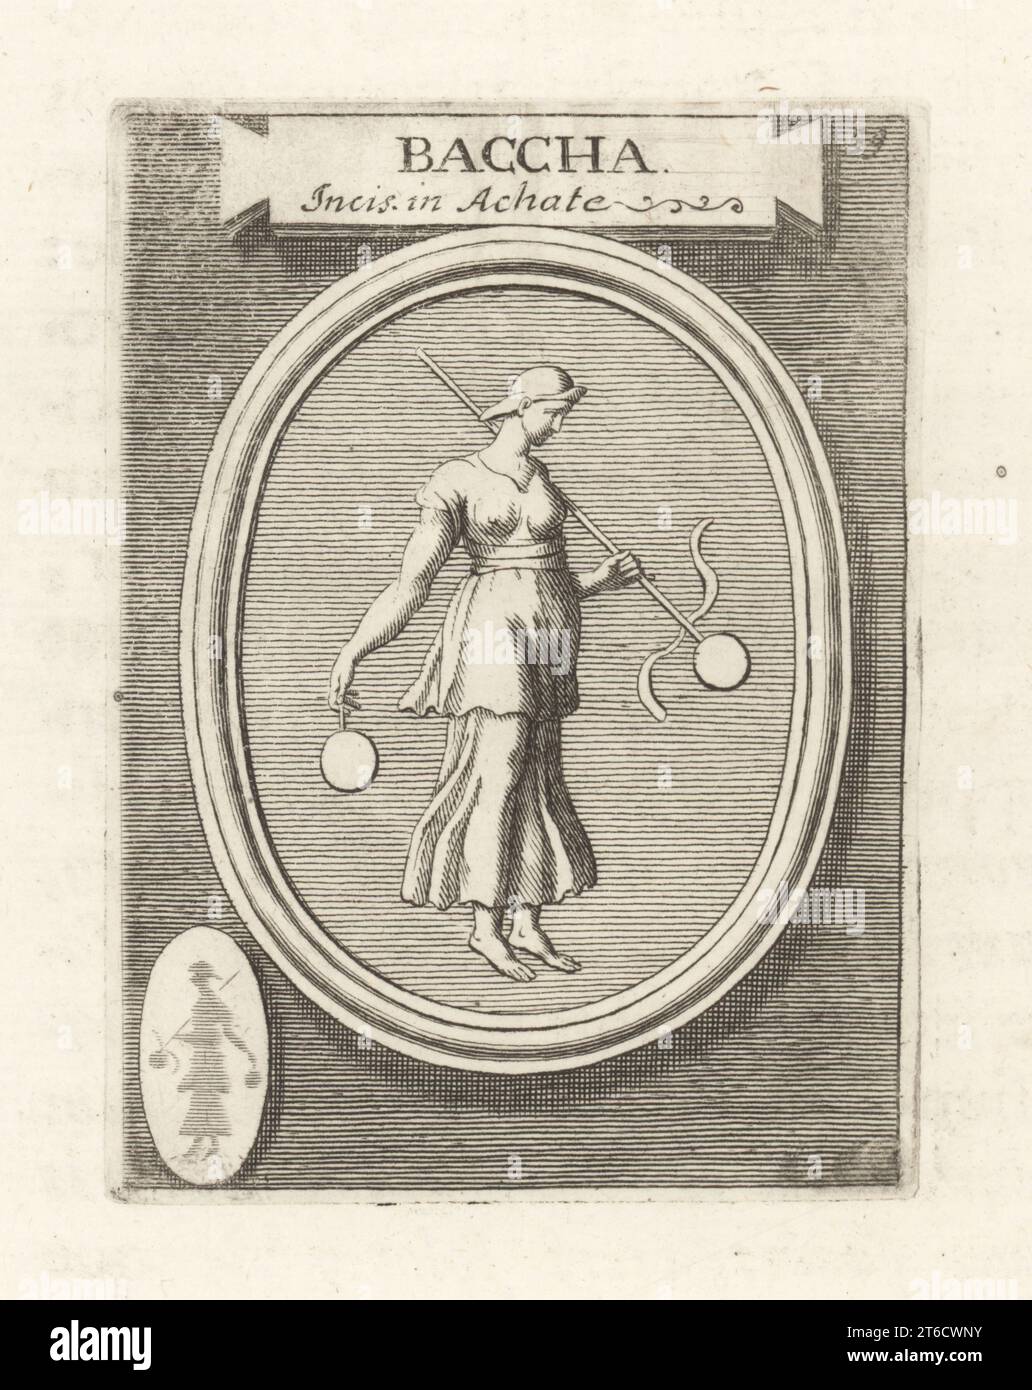 Bacchante or acolyte of Bacchus, Roman god of wine. (Fufluns Pacha in Etruscan religion.) In hat, wearing a soft purple silk tunic and skirt. From an engraved agate gem. Baccha Incis in Achate. Copperplate engraving from Francesco Valesio, Antonio Gori and Ridolfino Venutis Academia Etrusca, Museum Cortonense in quo Vetera Monumenta, (Etruscan Academy or Museum of Cortona), Faustus Amideus, Rome, 1750. Stock Photo